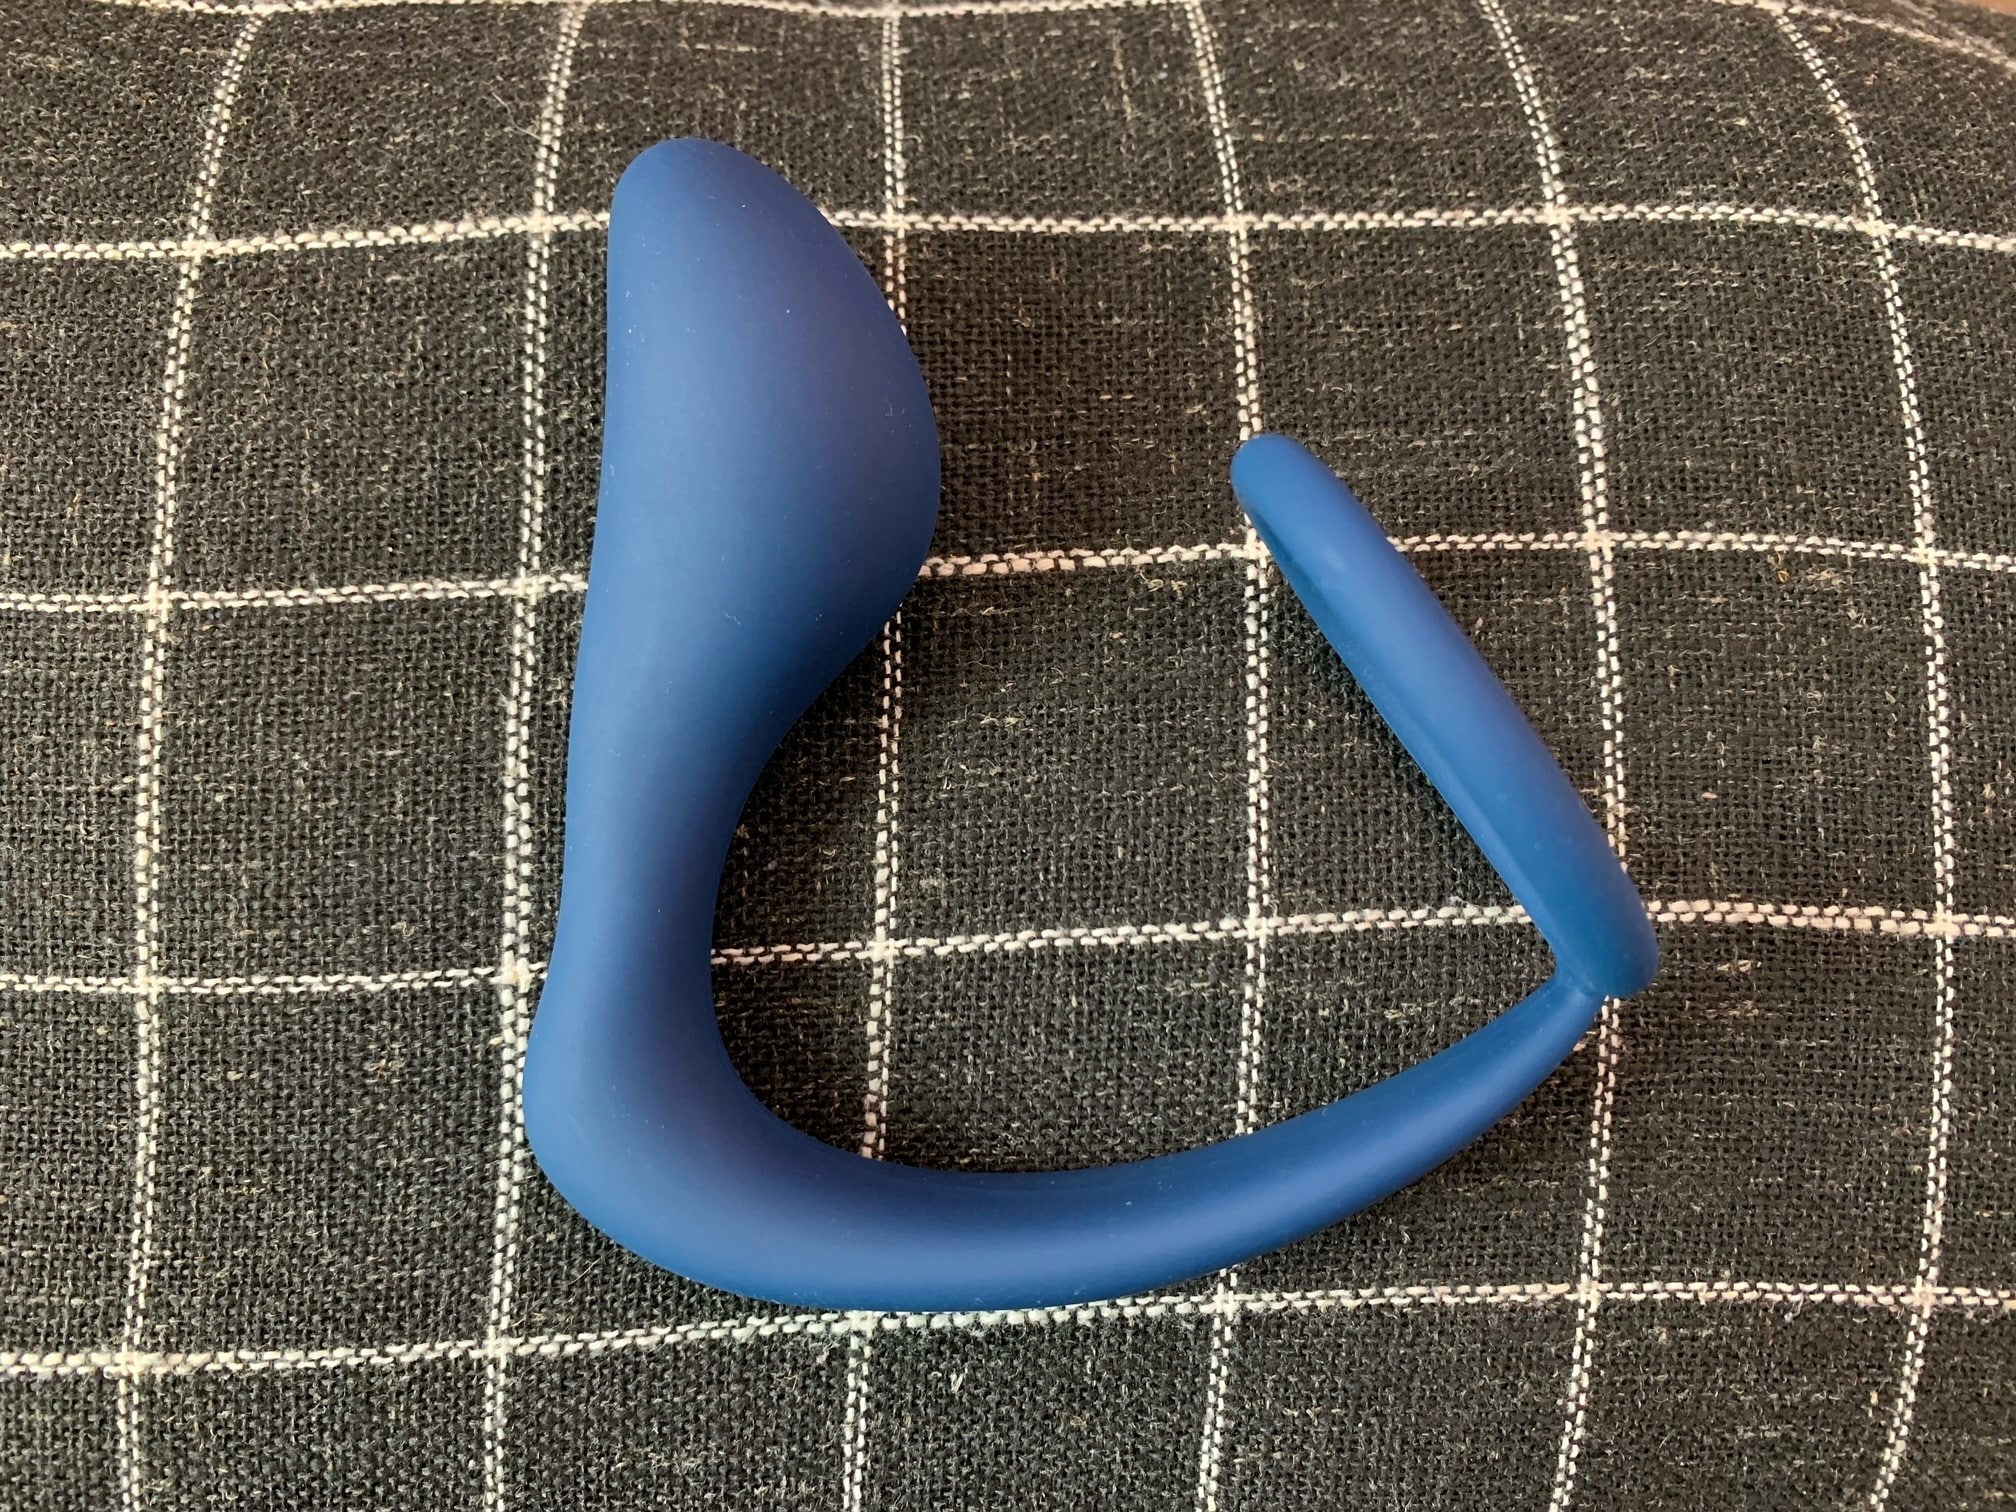 Lynk Plugged Cock Ring Prostate Massager Assessing the Packaging of the Lynk Plugged Cock Ring Prostate Massager